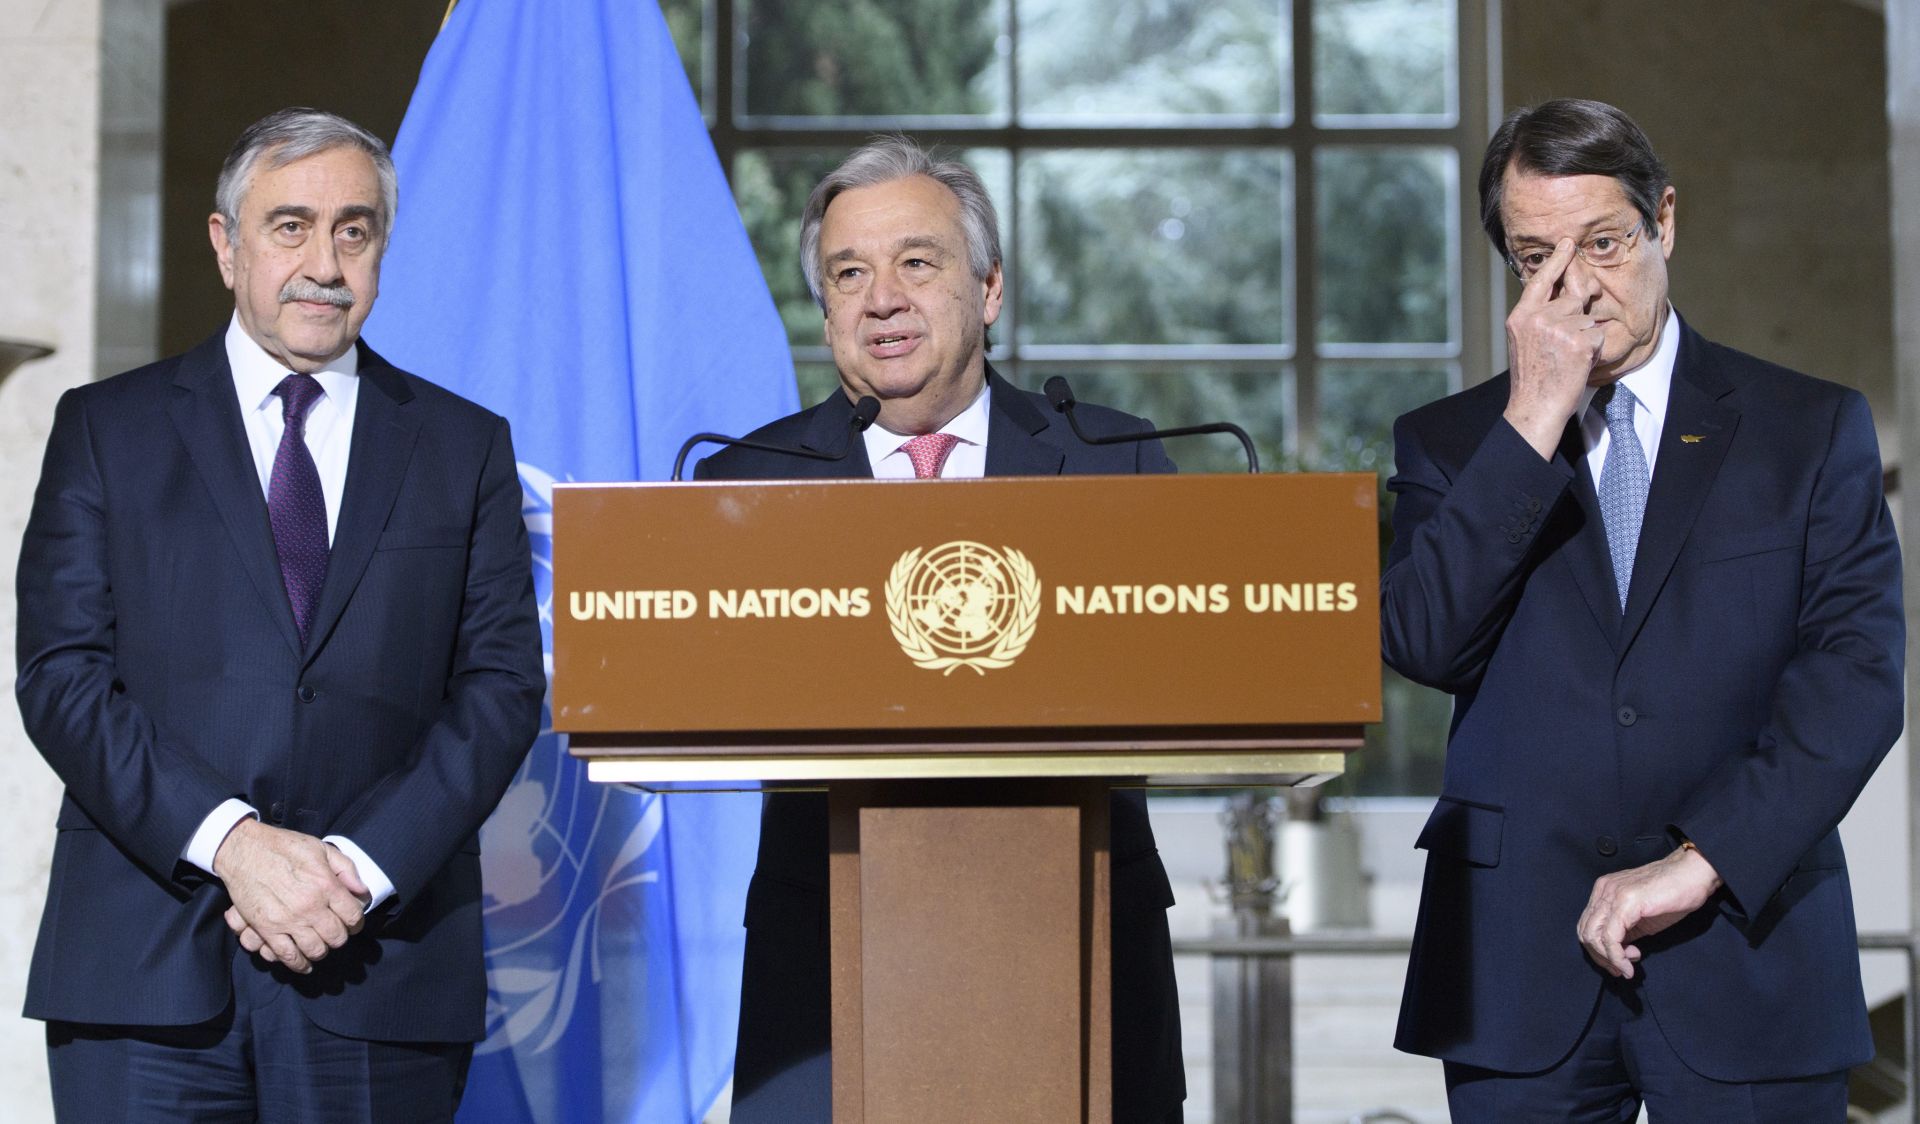 epa05712901 UN Secretary-General Antonio Guterres (C), speaks next to Greek Cypriot President Nicos Anastasiades, (R), and Turkish Cypriot leader Mustafa Akinci, (L), during a press conference after the Conference on Cyprus, on the sideline of the Cyprus Peace Talks, at the European headquarters of the United Nations in Geneva, Switzerland, 12 January 2017.  EPA/LAURENT GILLIERON / POOL